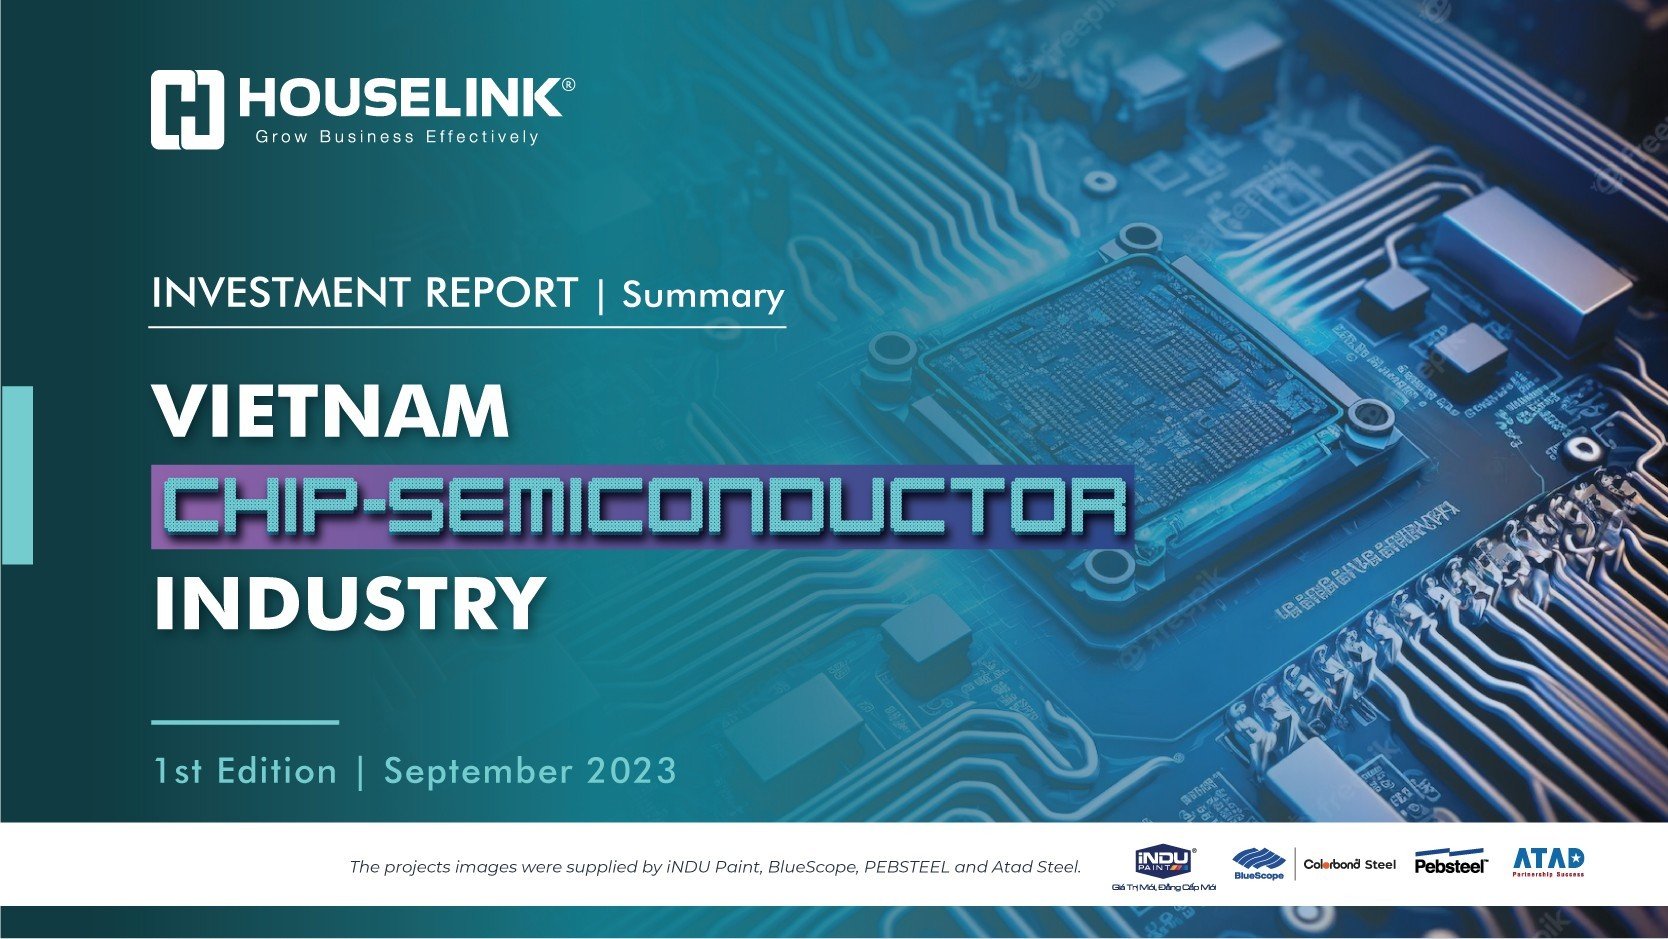 Investment Report - Vietnam Chip-Semiconductor Industry 2023